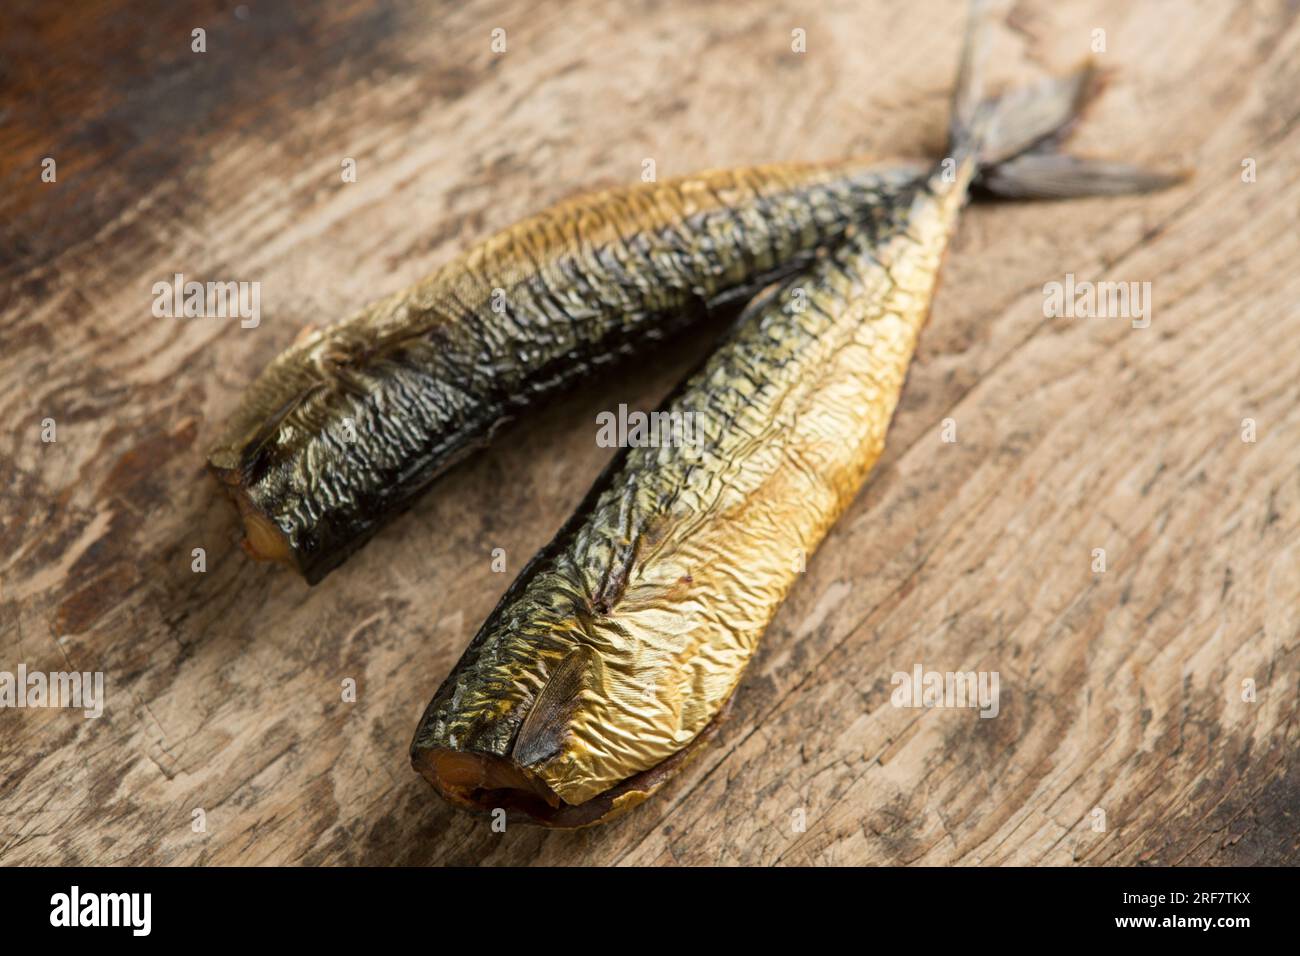 Two hot smoked mackerel, Scomber scombrus on a wooden chopping board that will be used to make a homemade mackerel pate. England UK GB Stock Photo